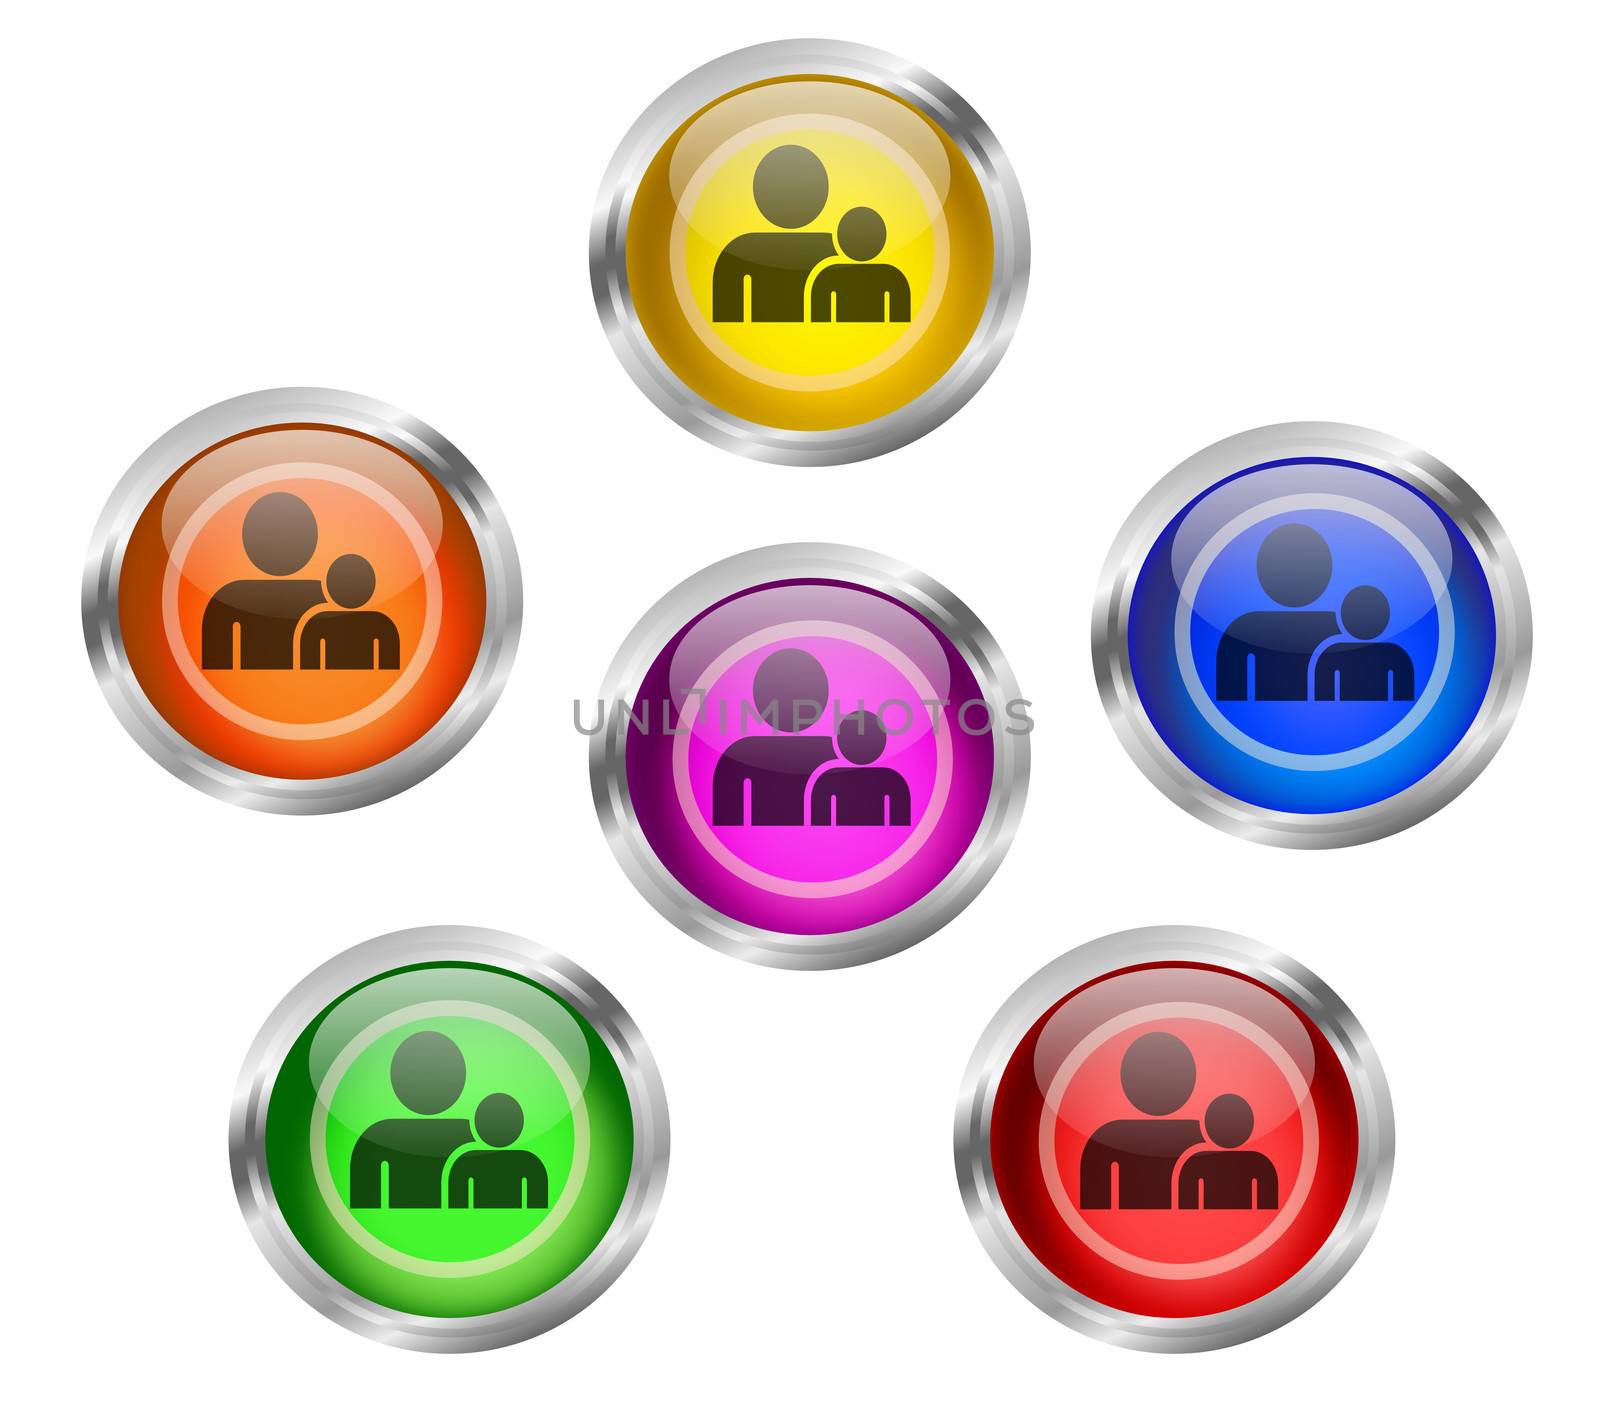 Set of shiny buttons with people, employee, buddy icon buttons different colors
